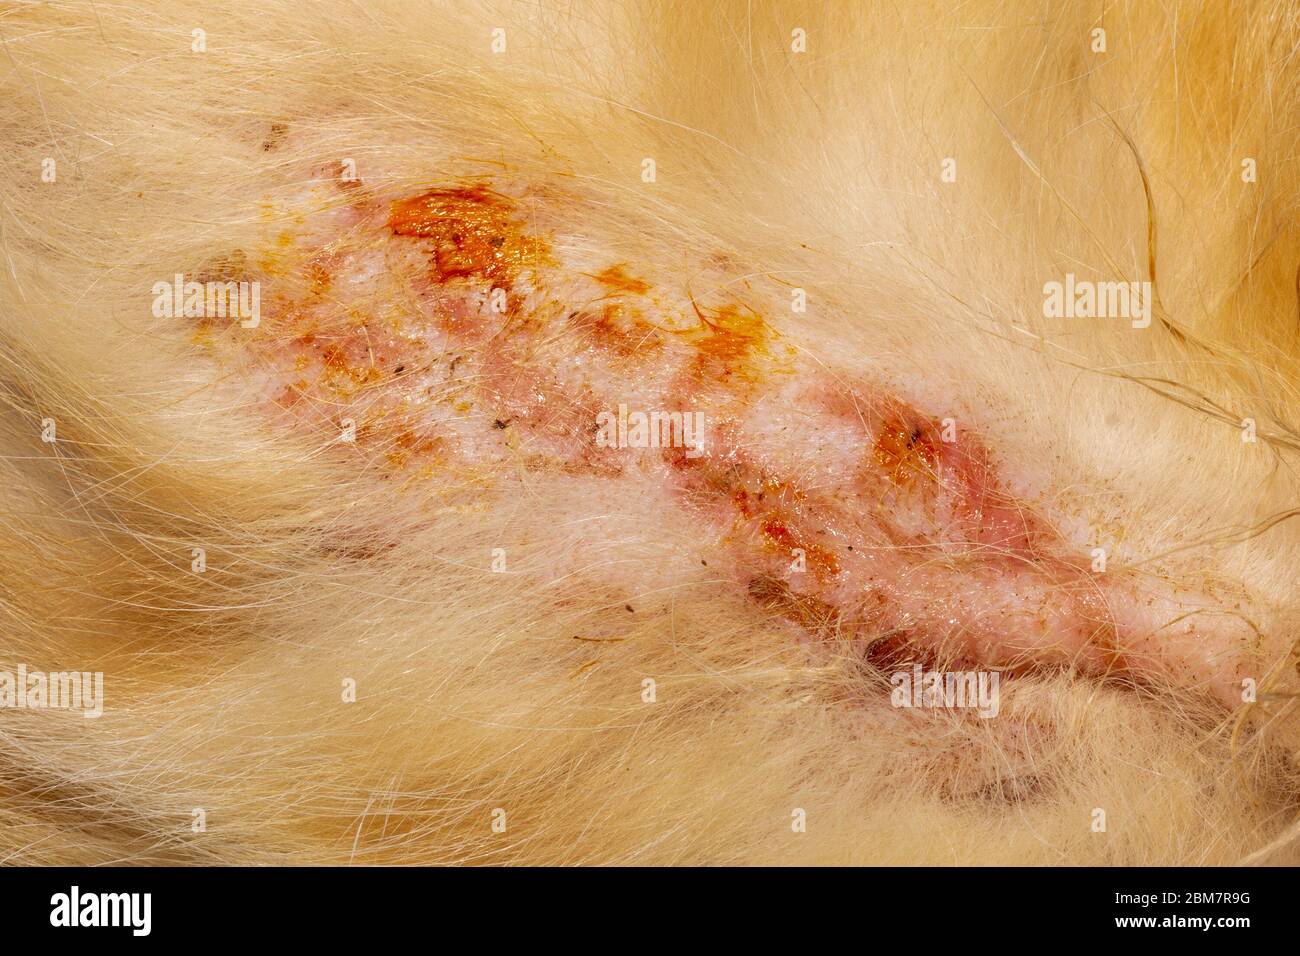 bacterial skin infection pyoderma or lichen on the skin of a red cat Stock Photo